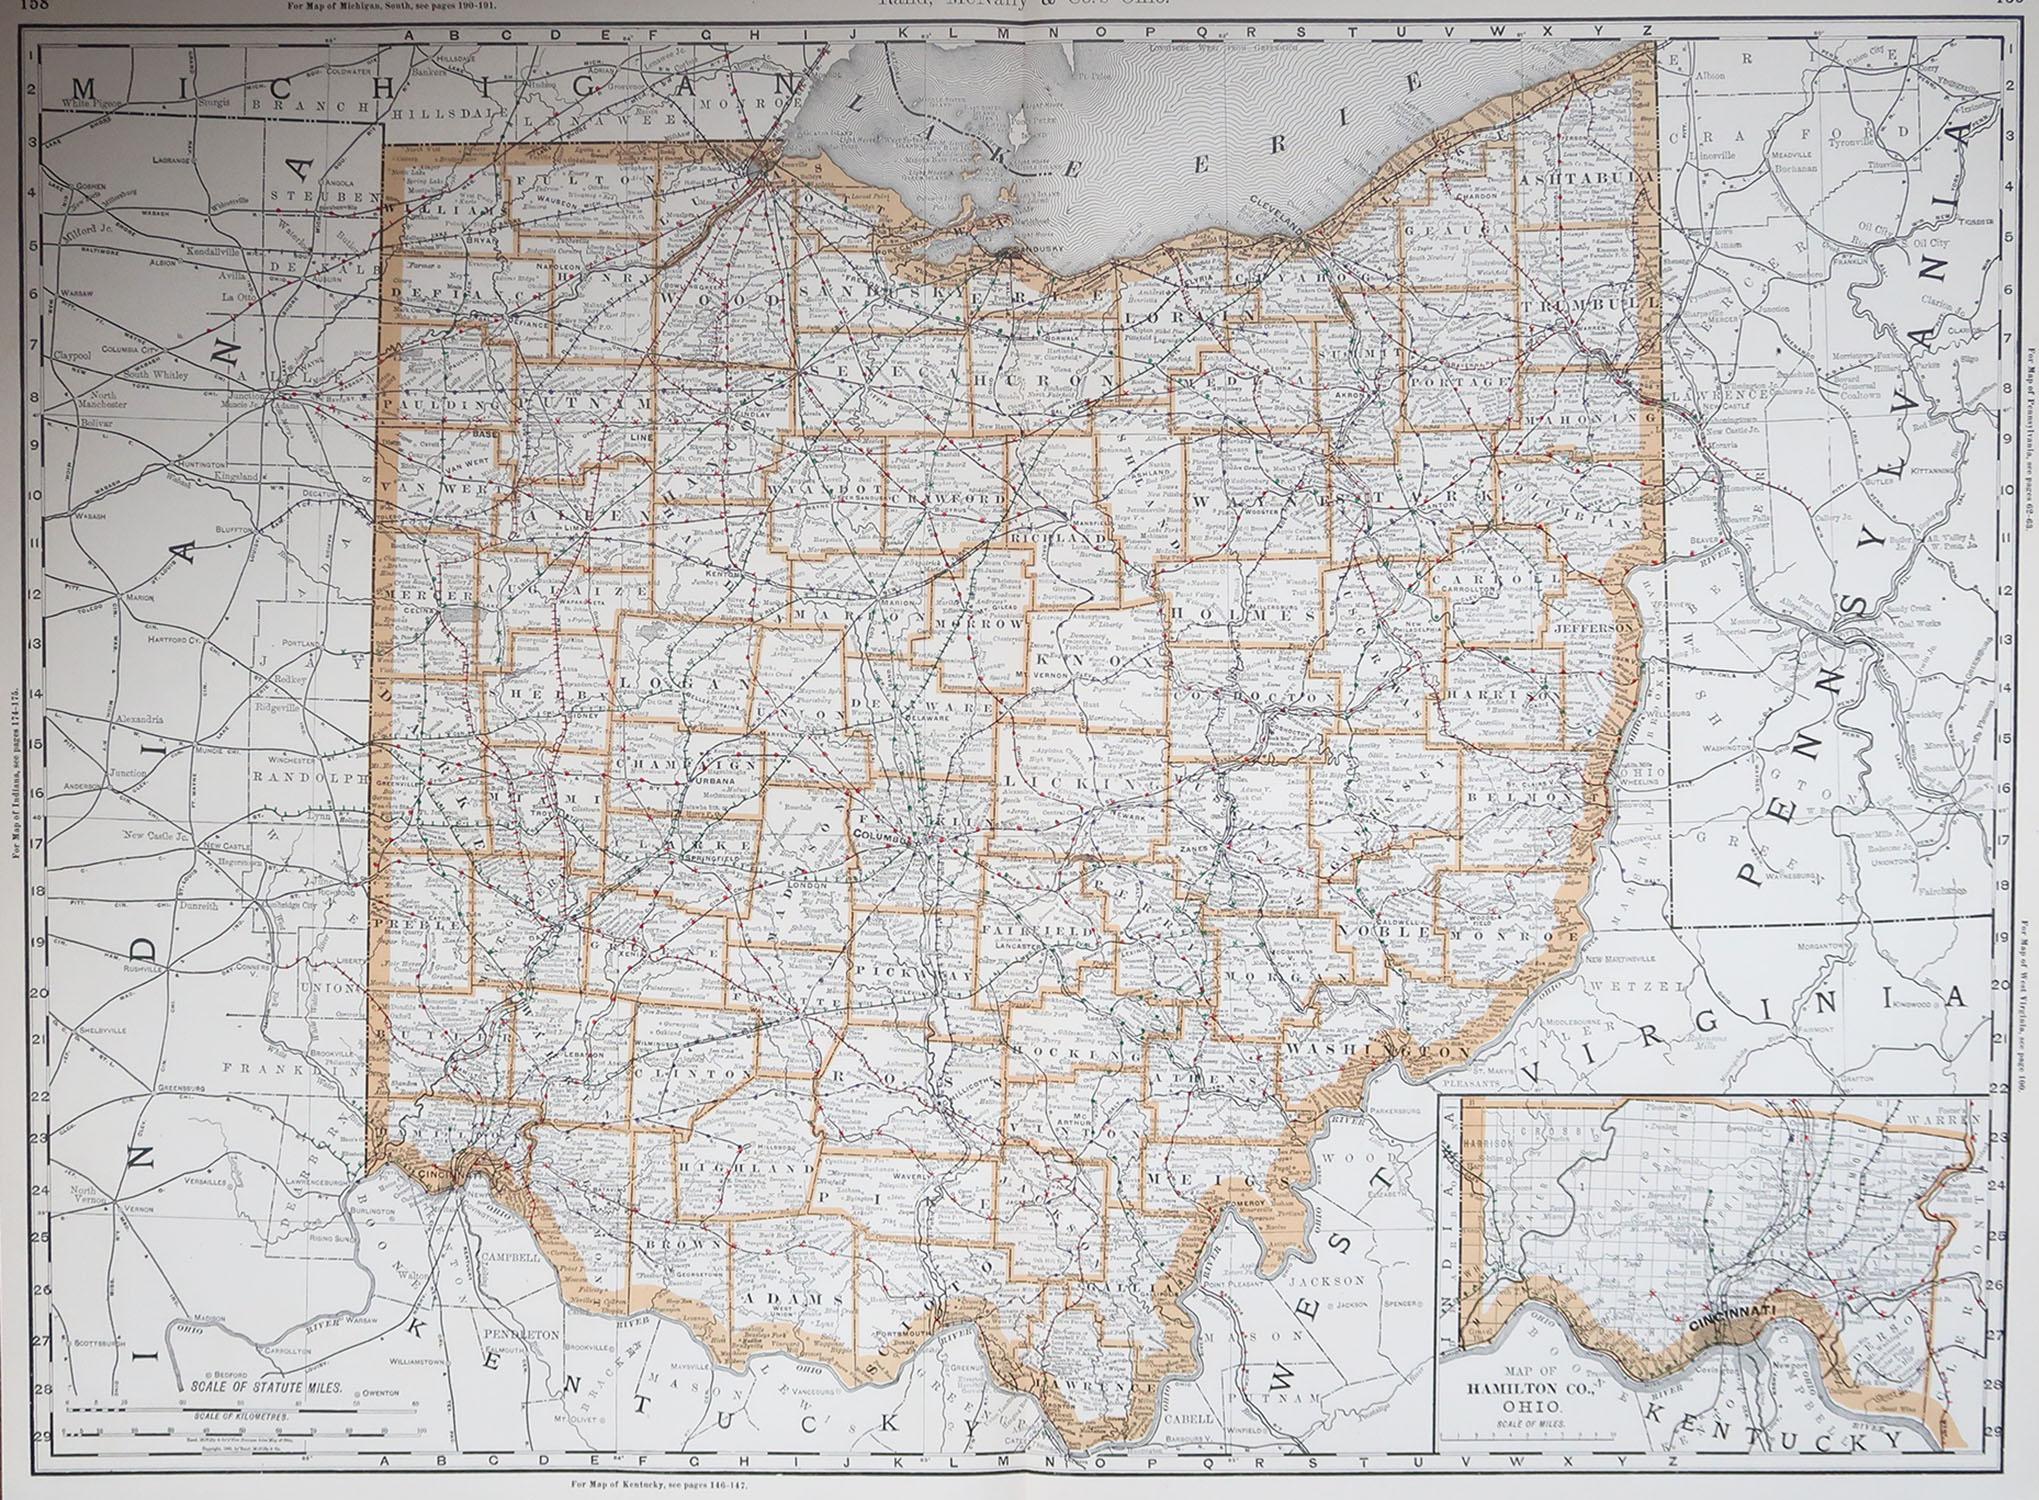 Fabulous map of Ohio.

Original color.

By Rand, McNally & Co.

Published, 1894.

Unframed.

Free shipping.